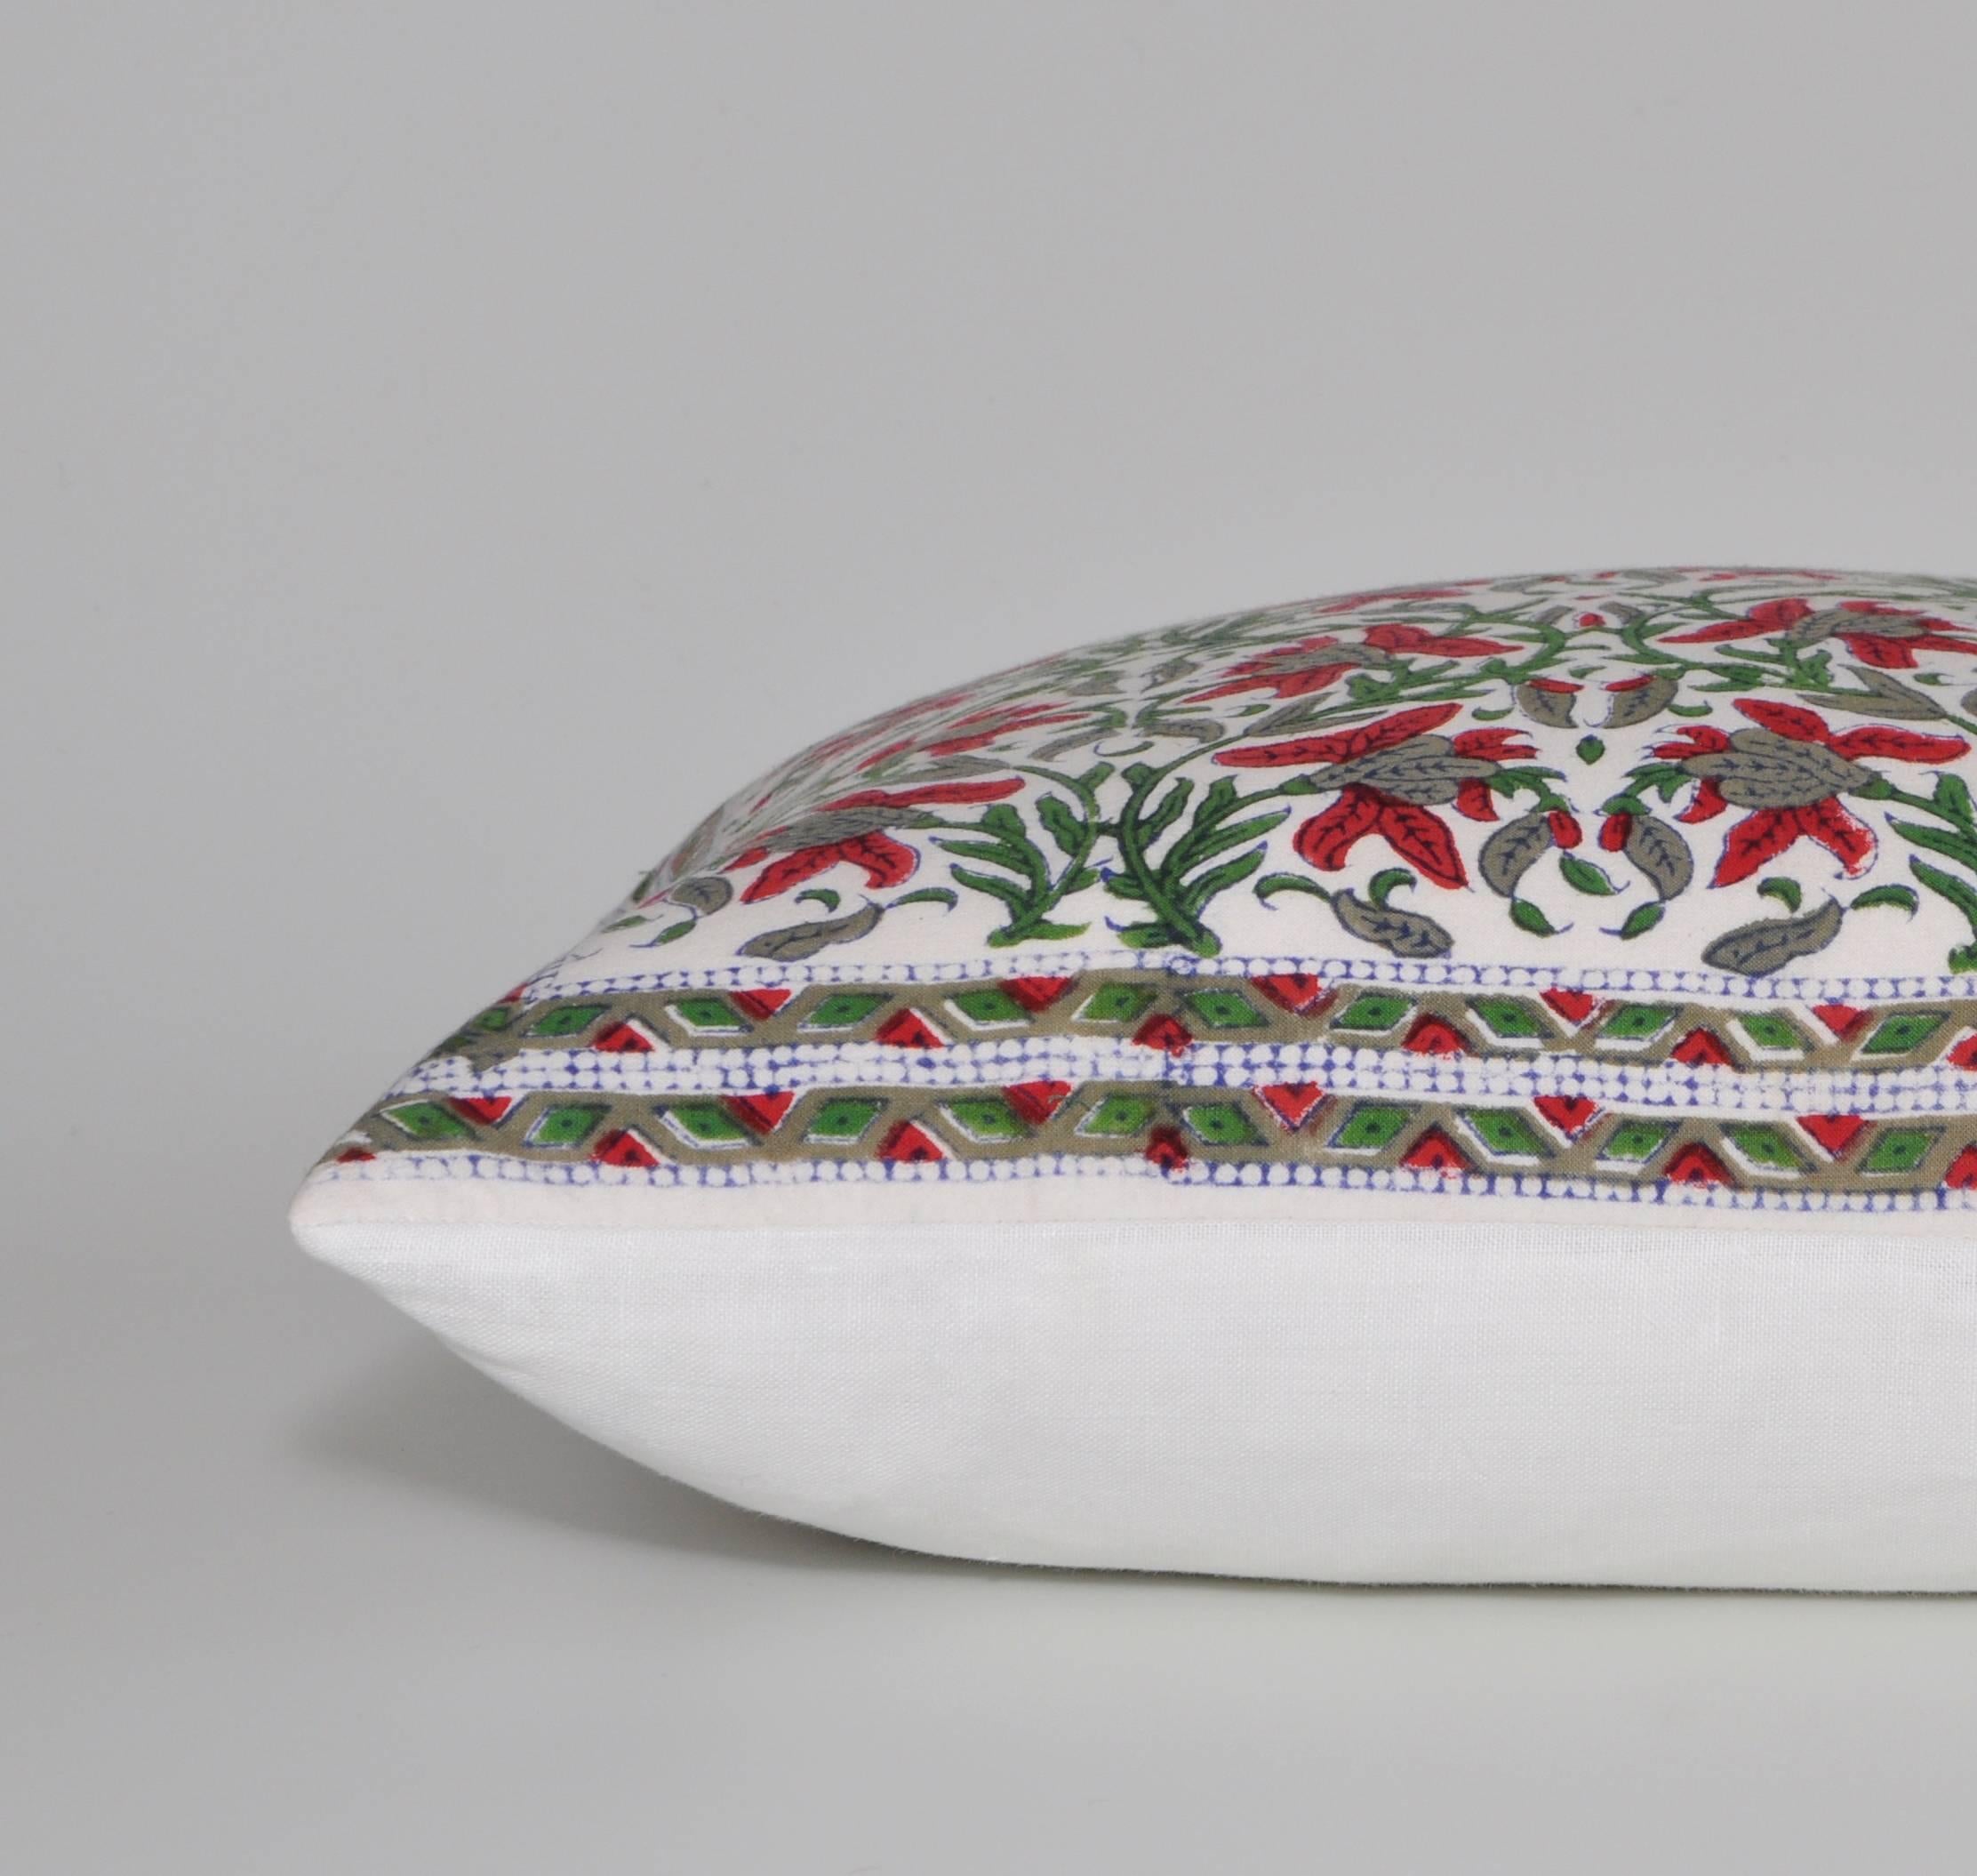 Beautiful ethnic pillow (cushion). Vintage fine Indian cotton backed in crisp Irish linen. An exquisite pattern of stylized flower motifs delicately intertwined and spiralling upwards in a growing manner, framed by a matching decorative border.